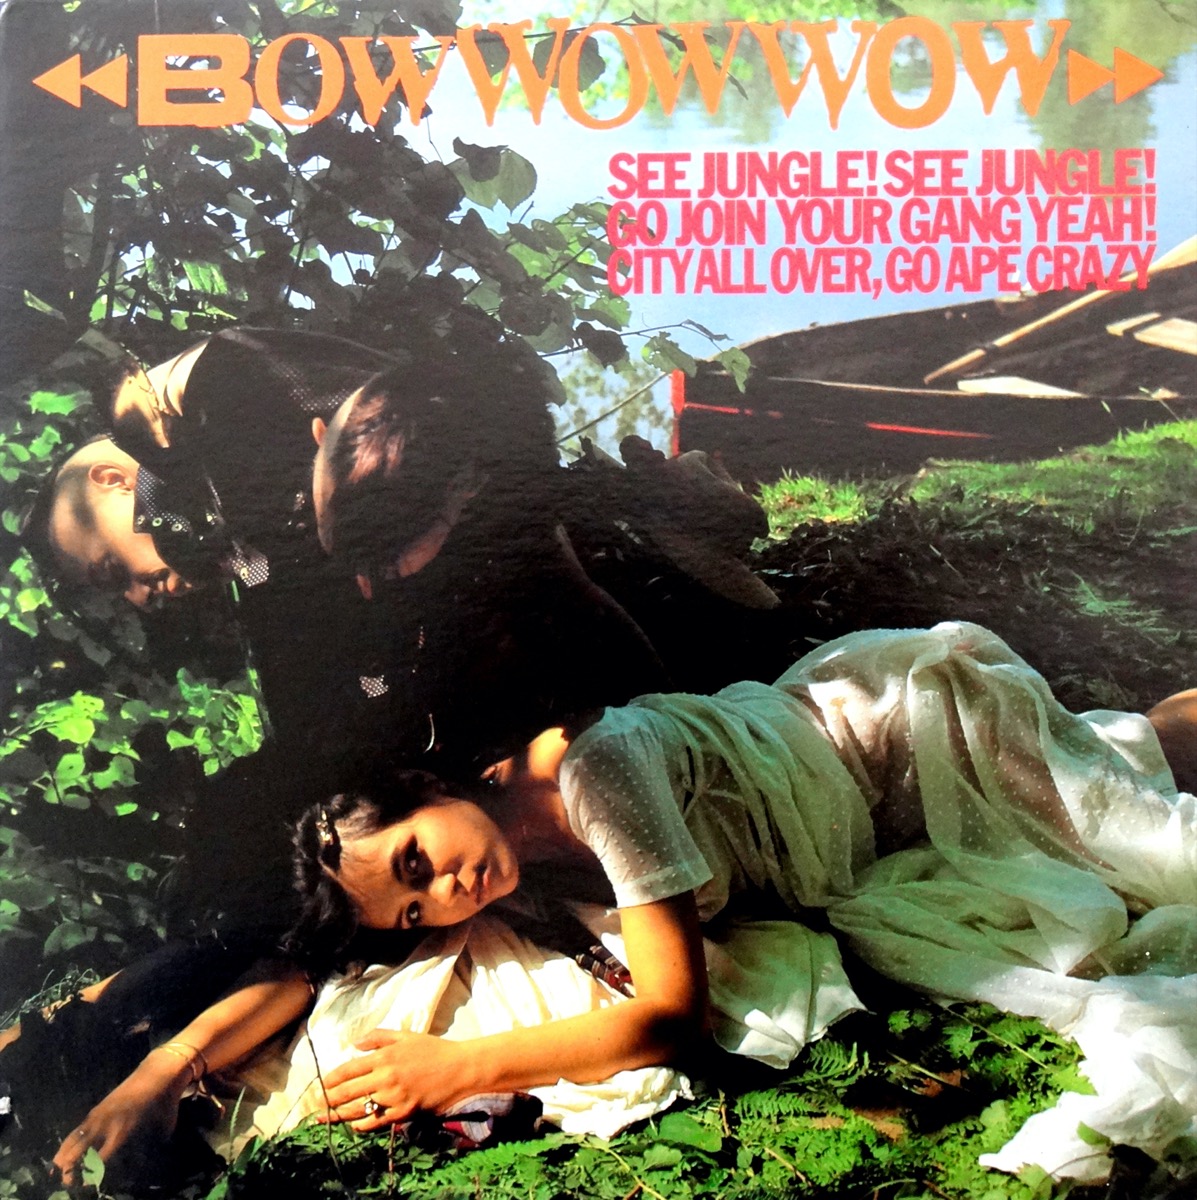 album cover of see jungle! by bow wow wow